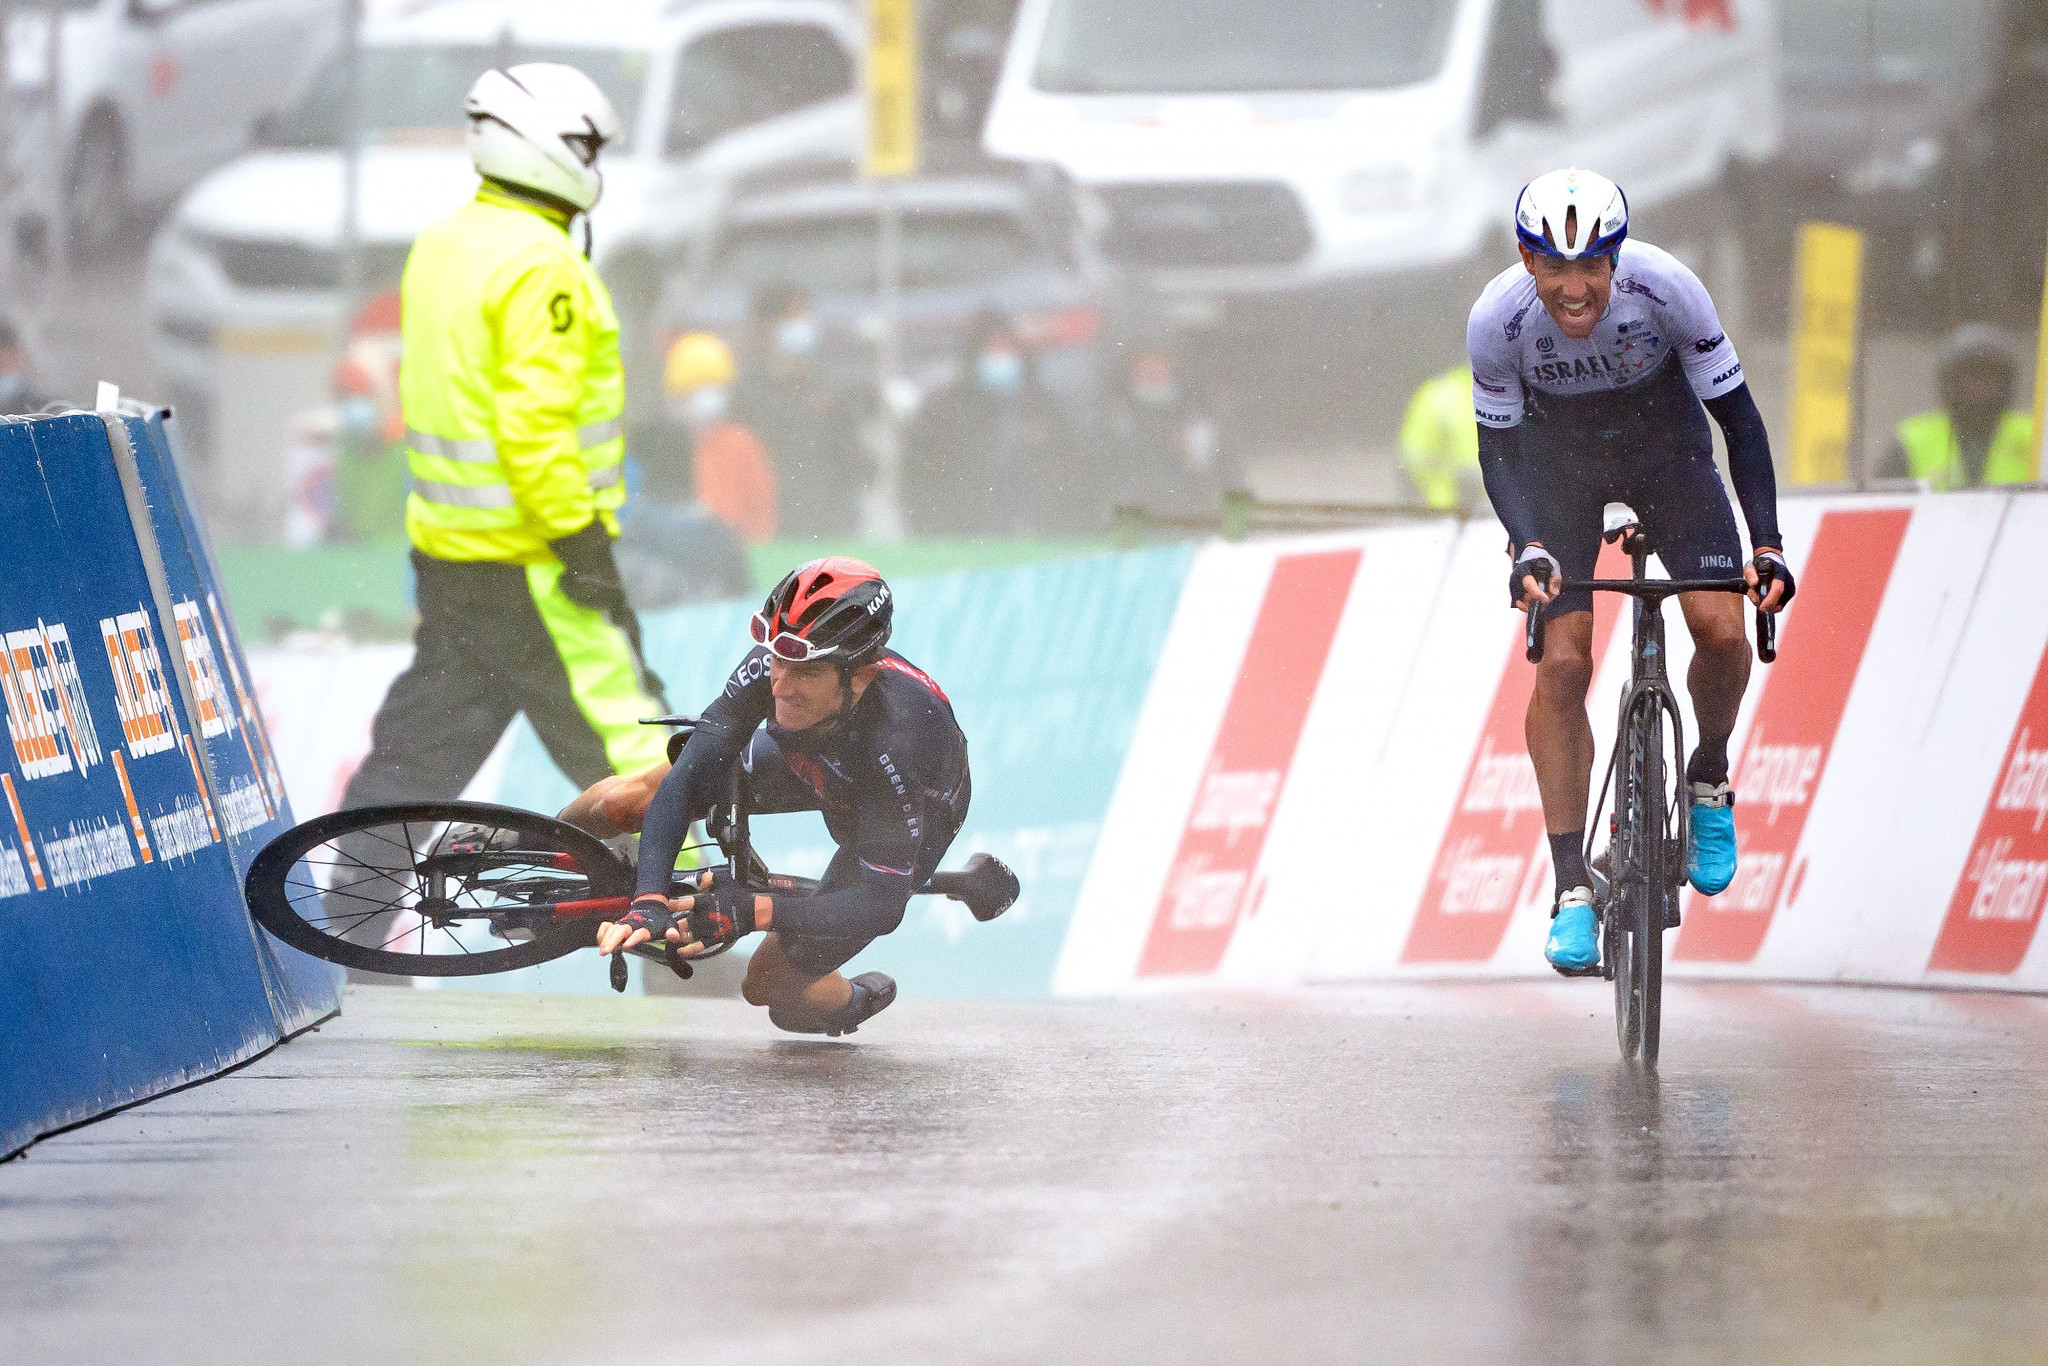 Geraint Thomas, left, crashed in the closing kilometre as Michael Woods earned the stage win at the Tour de Romandie ©Getty Images